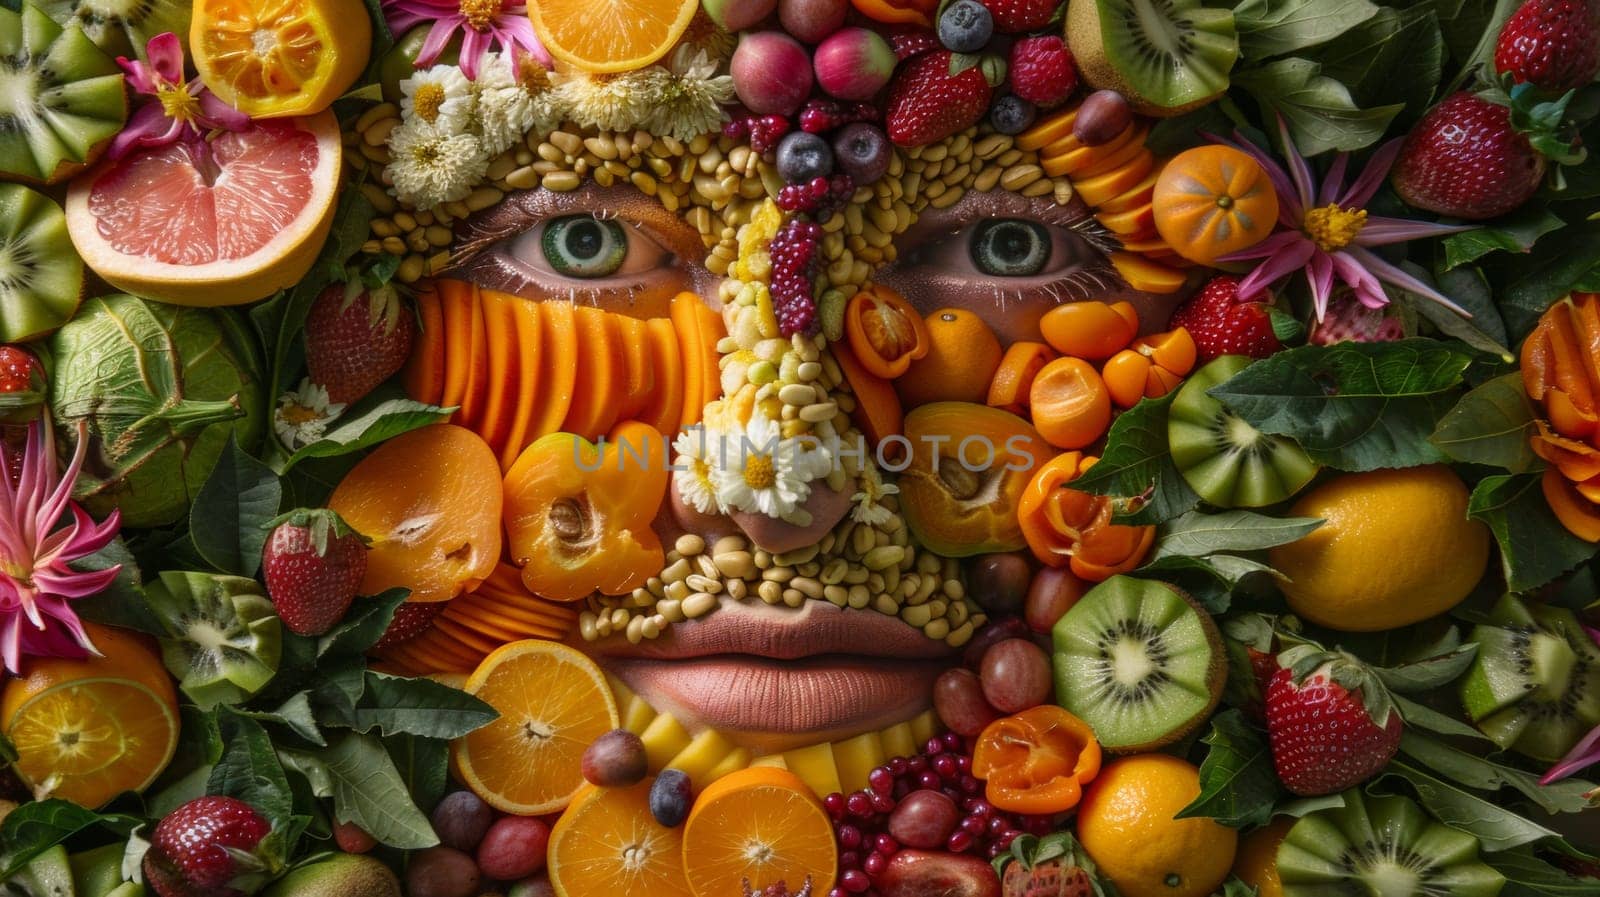 A face made of fruit and vegetables arranged in a mosaic